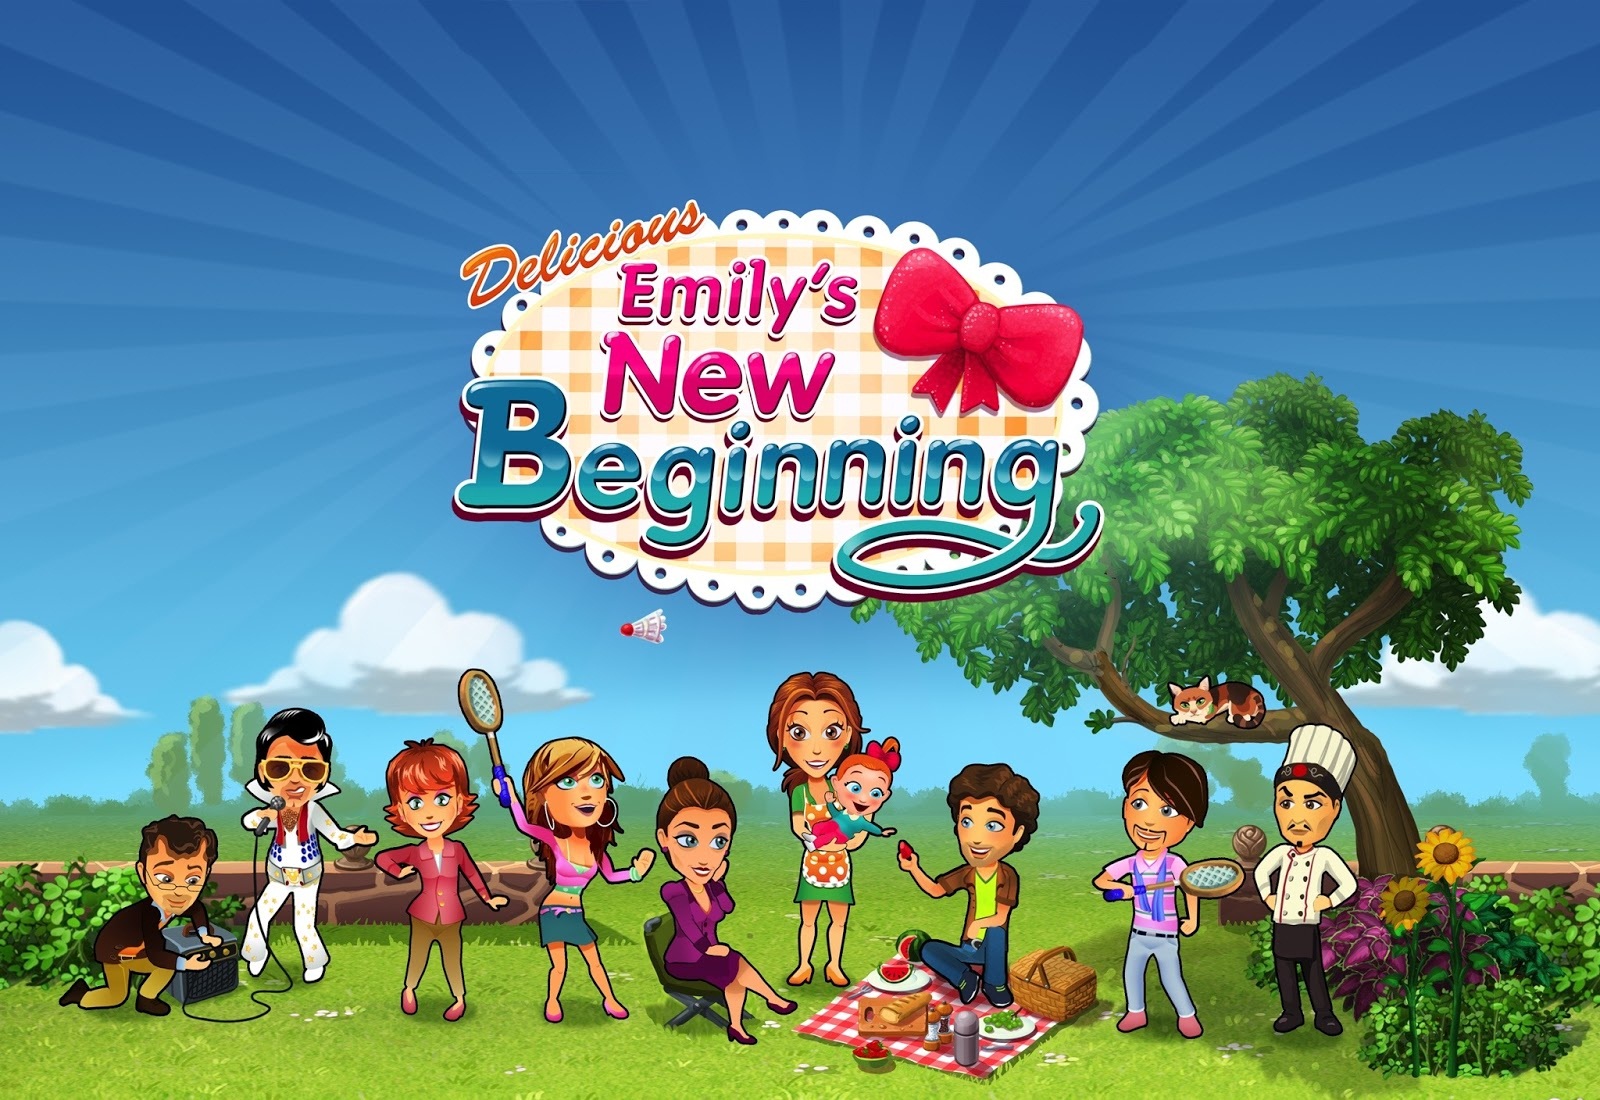 delicious emily new beginning free download full version pc